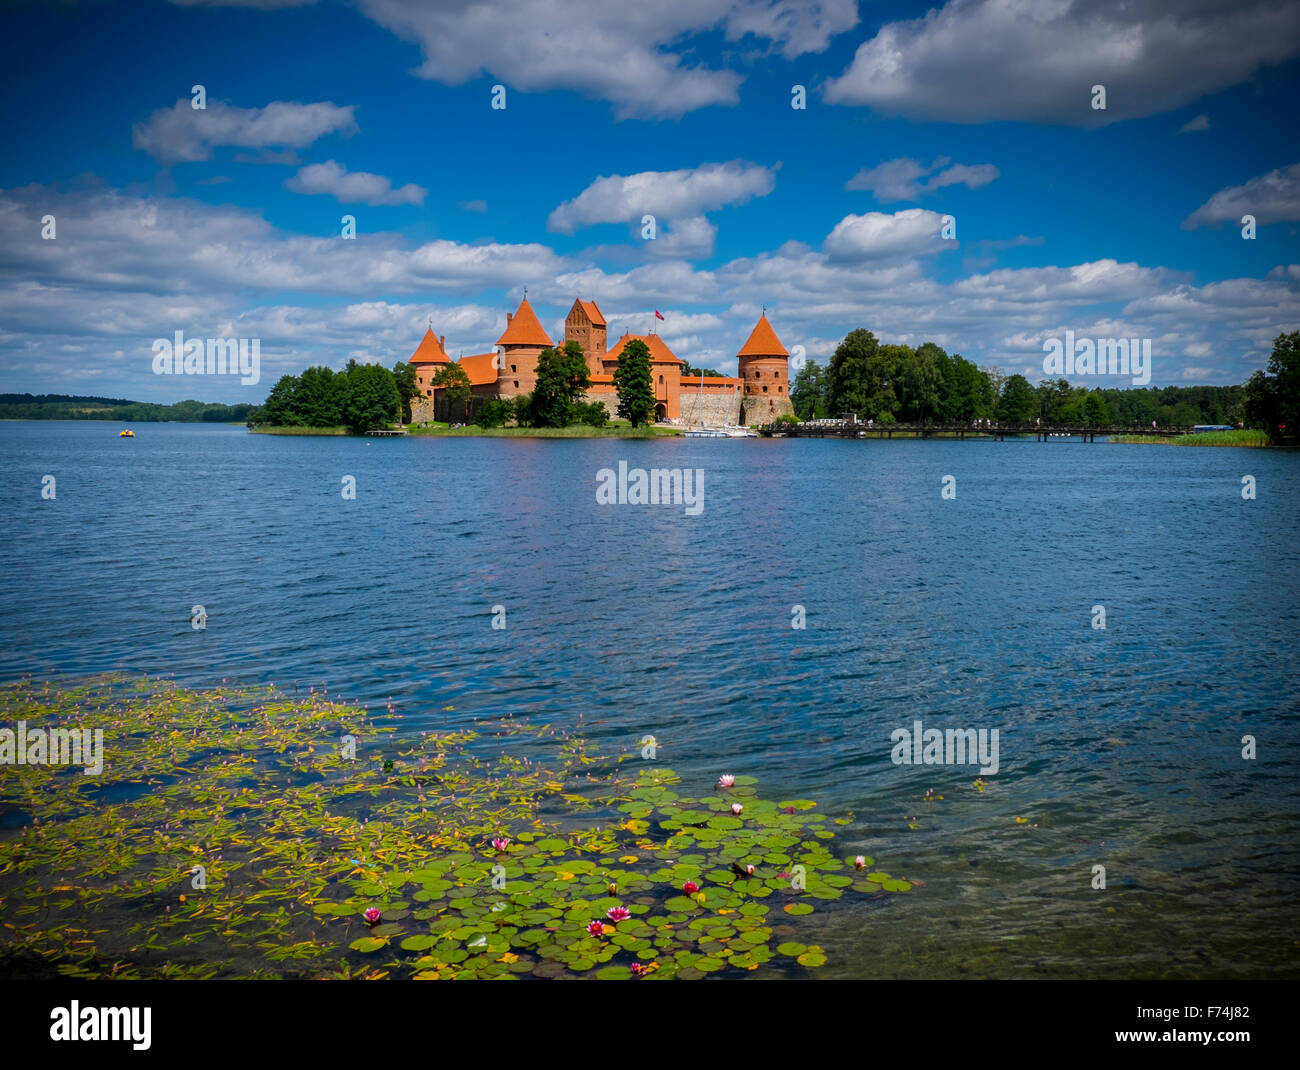 Island Castle located in Trakai in Lithuania on an island in Lake Galve Stock Photo